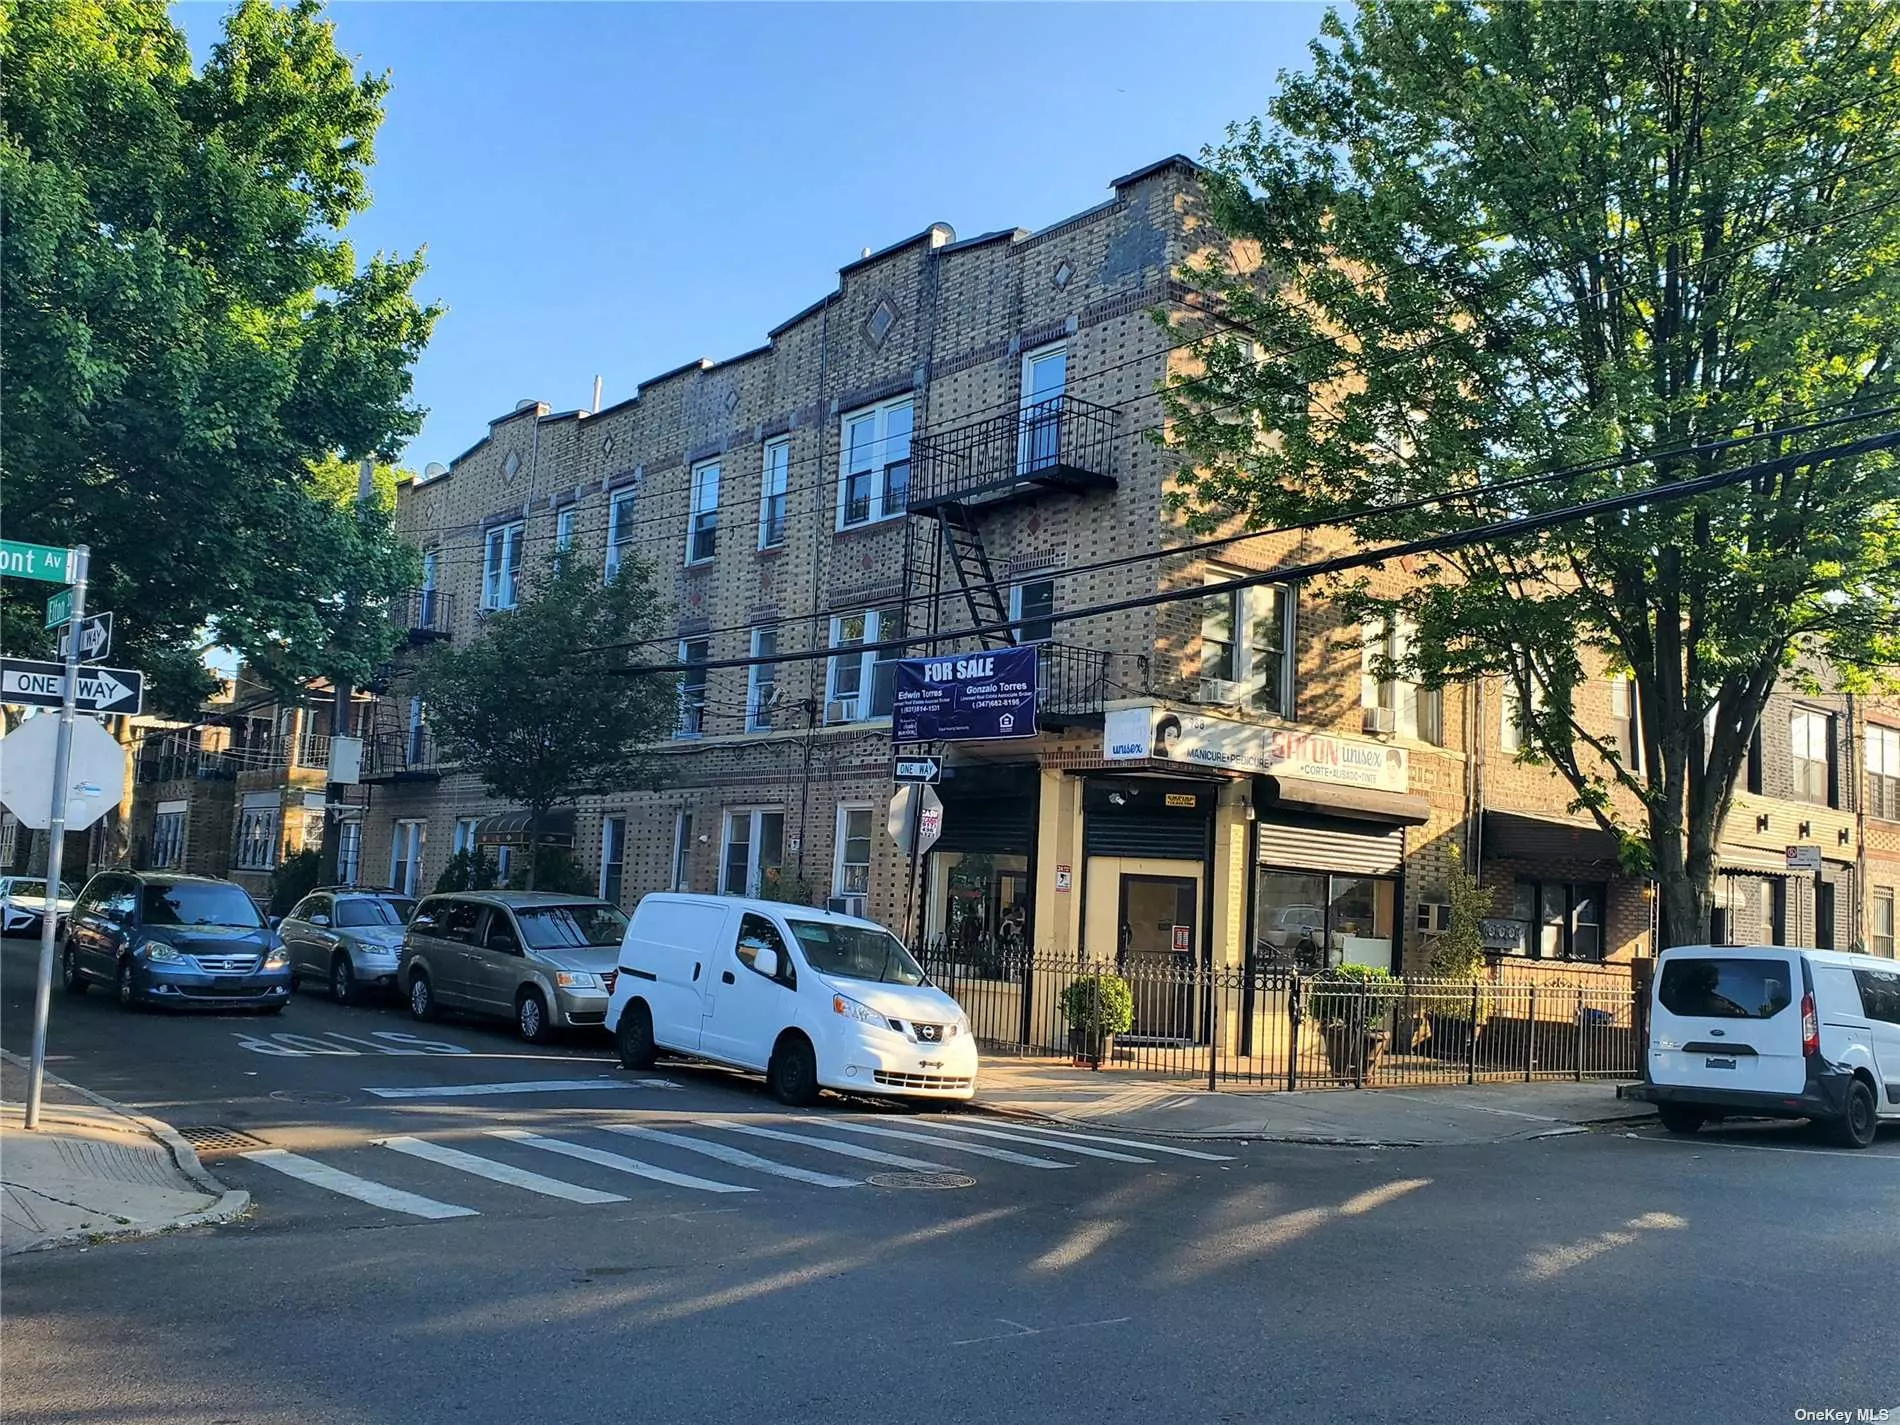 Excellent investment opportunity in ENY Brooklyn. This property features 7 units (6 residential and 1commercial). All residential units are rent stabilized and occupied. Apartments #&rsquo;s 2 through 6 have 2-brms/1-fbath each and Apartment #1 1-brm/1-fbth. The boiler was replaced in 2020. All information is not guaranteed and prospective buyers should verify it independently.